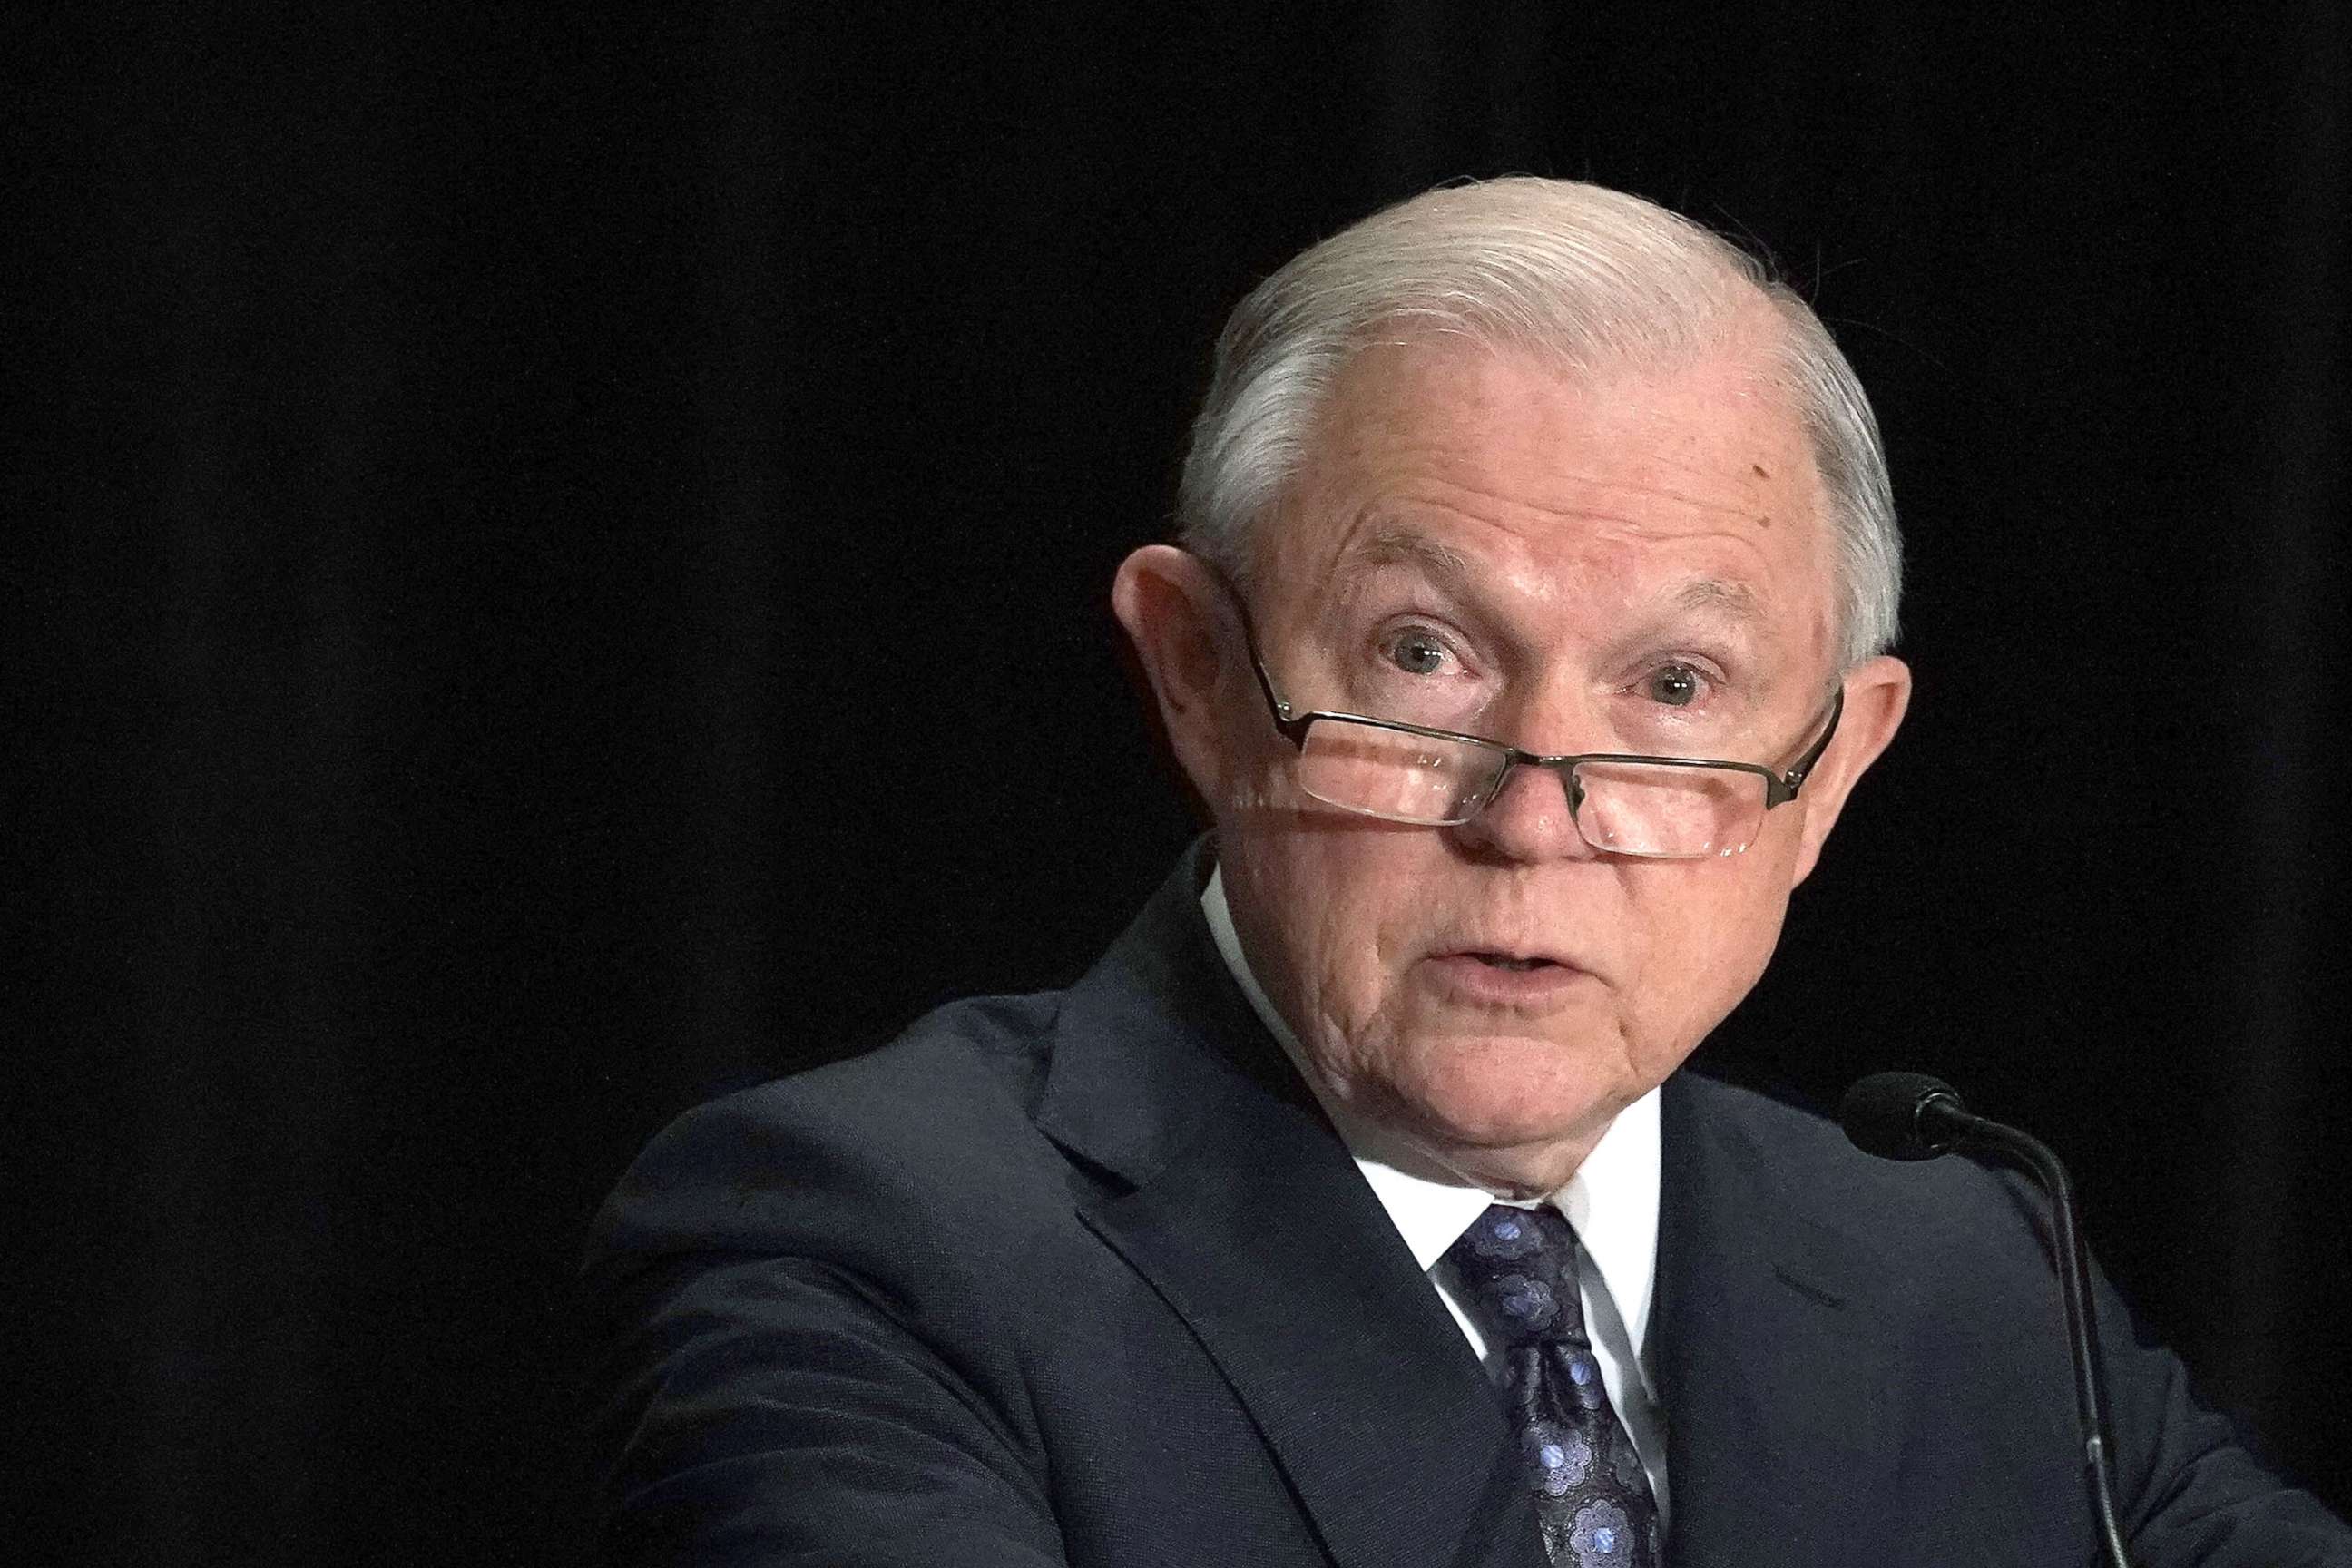 PHOTO: Attorney General Jeff Sessions delivers remarks at the Justice Department's Executive Officer for Immigration Review (EOIR) Annual Legal Training Program June 11, 2018 in Tysons, Virginia.